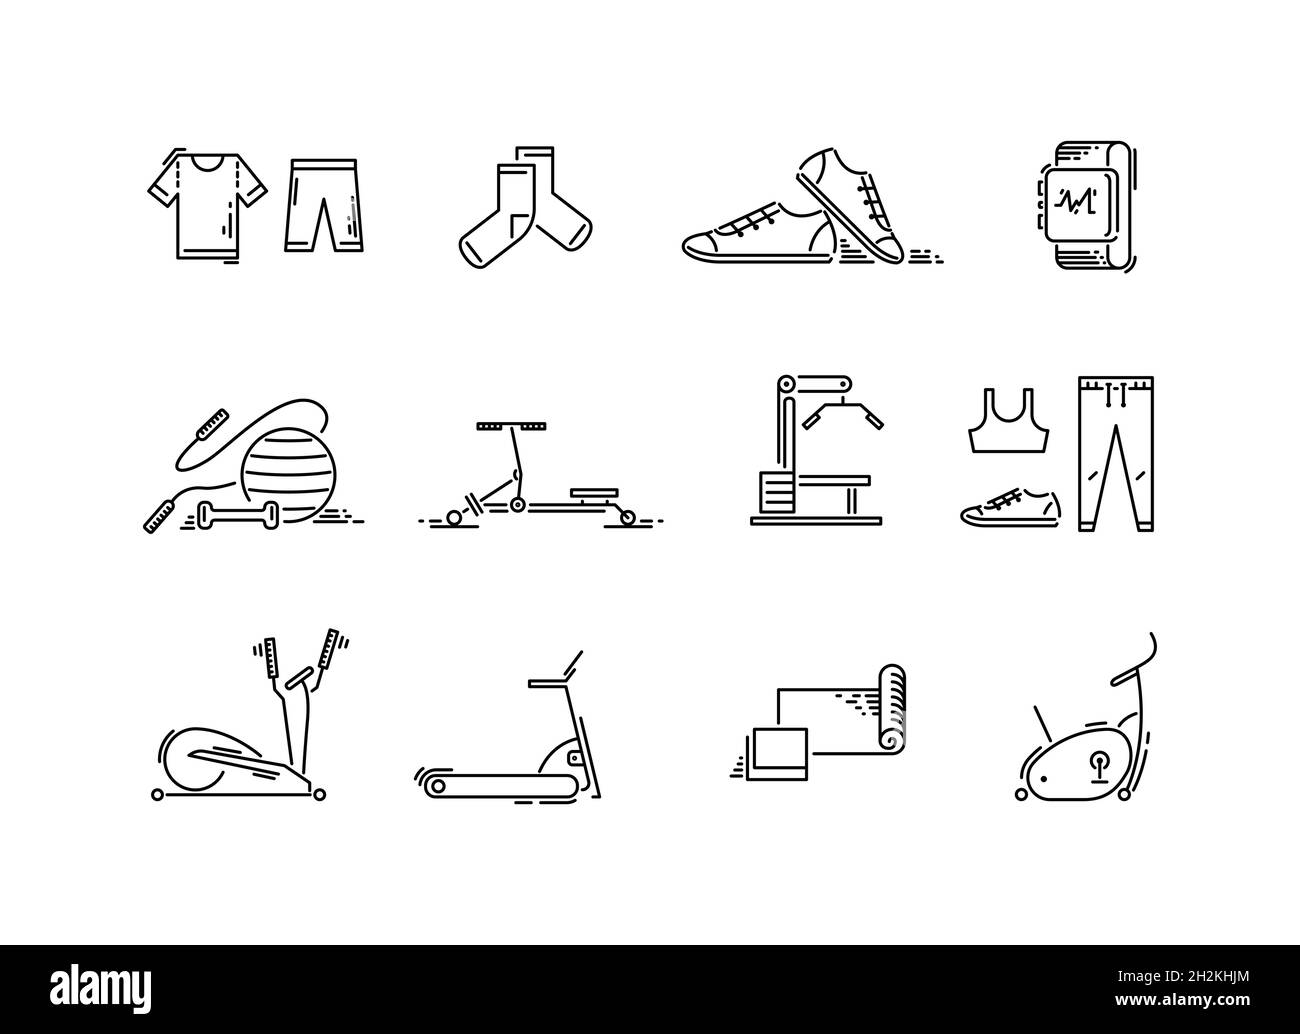 Line icons sport gym equipment. Cardio, fitness, yoga and training apparatus. Stock Vector